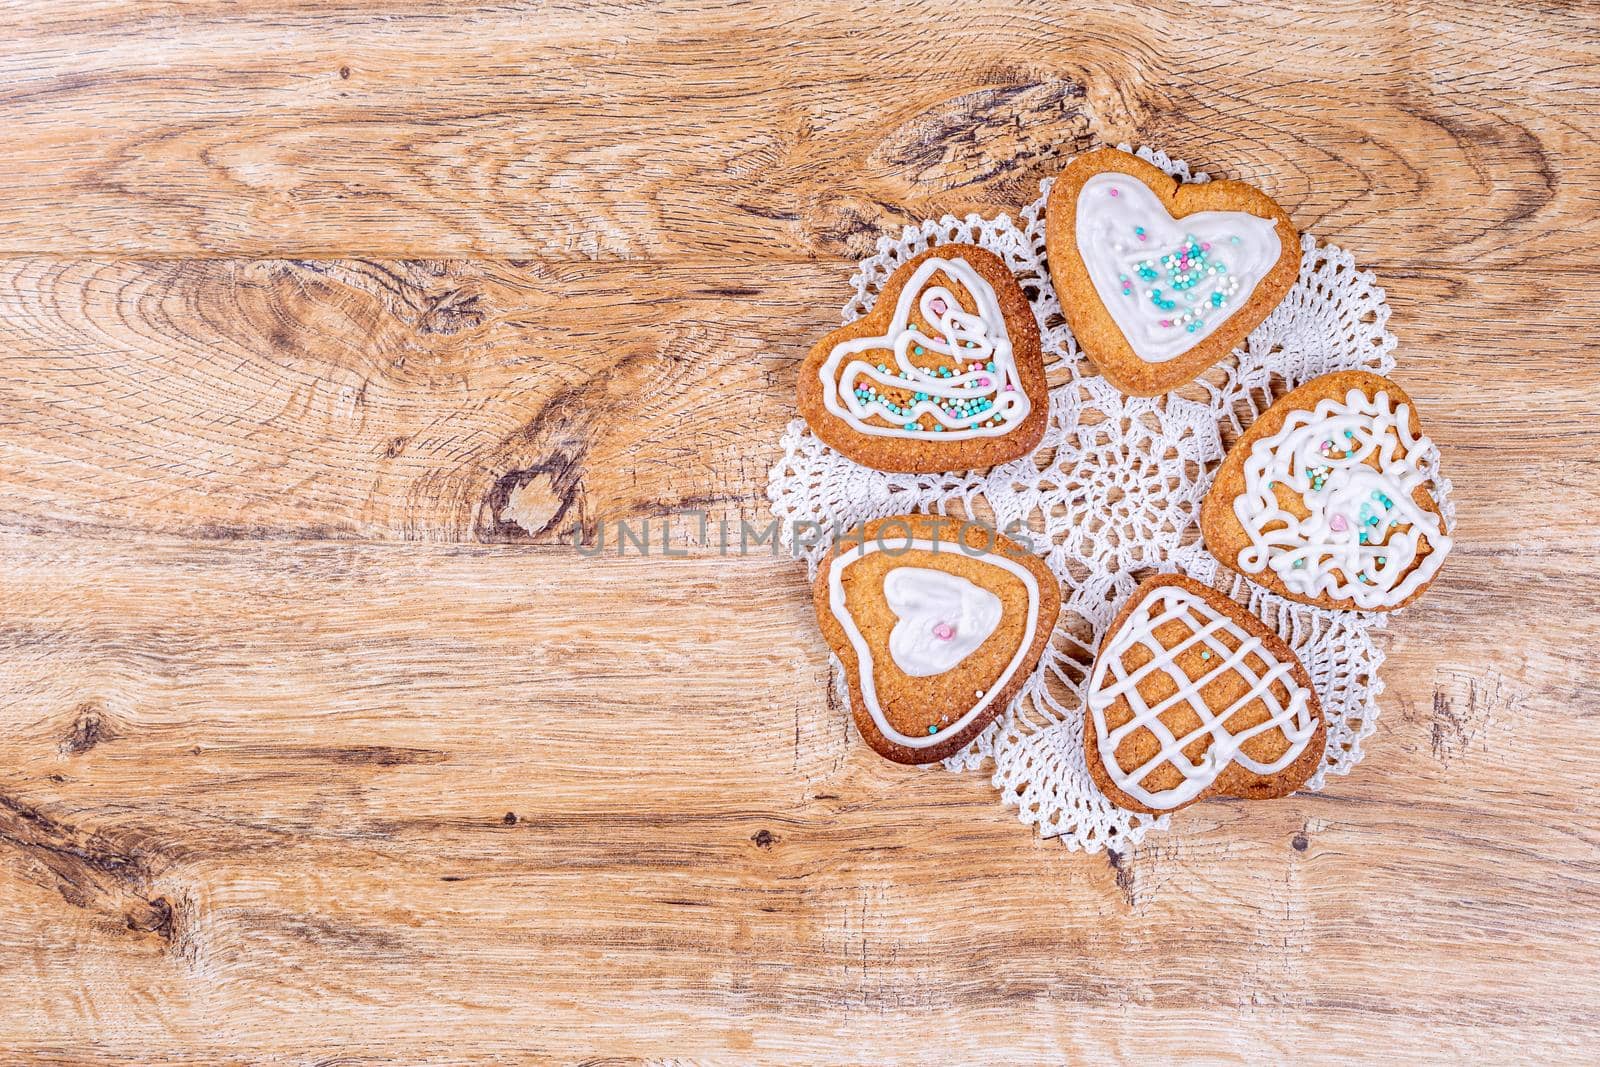 Homemade heart-shaped cookies, decorated with white icing with sprinkles by galinasharapova